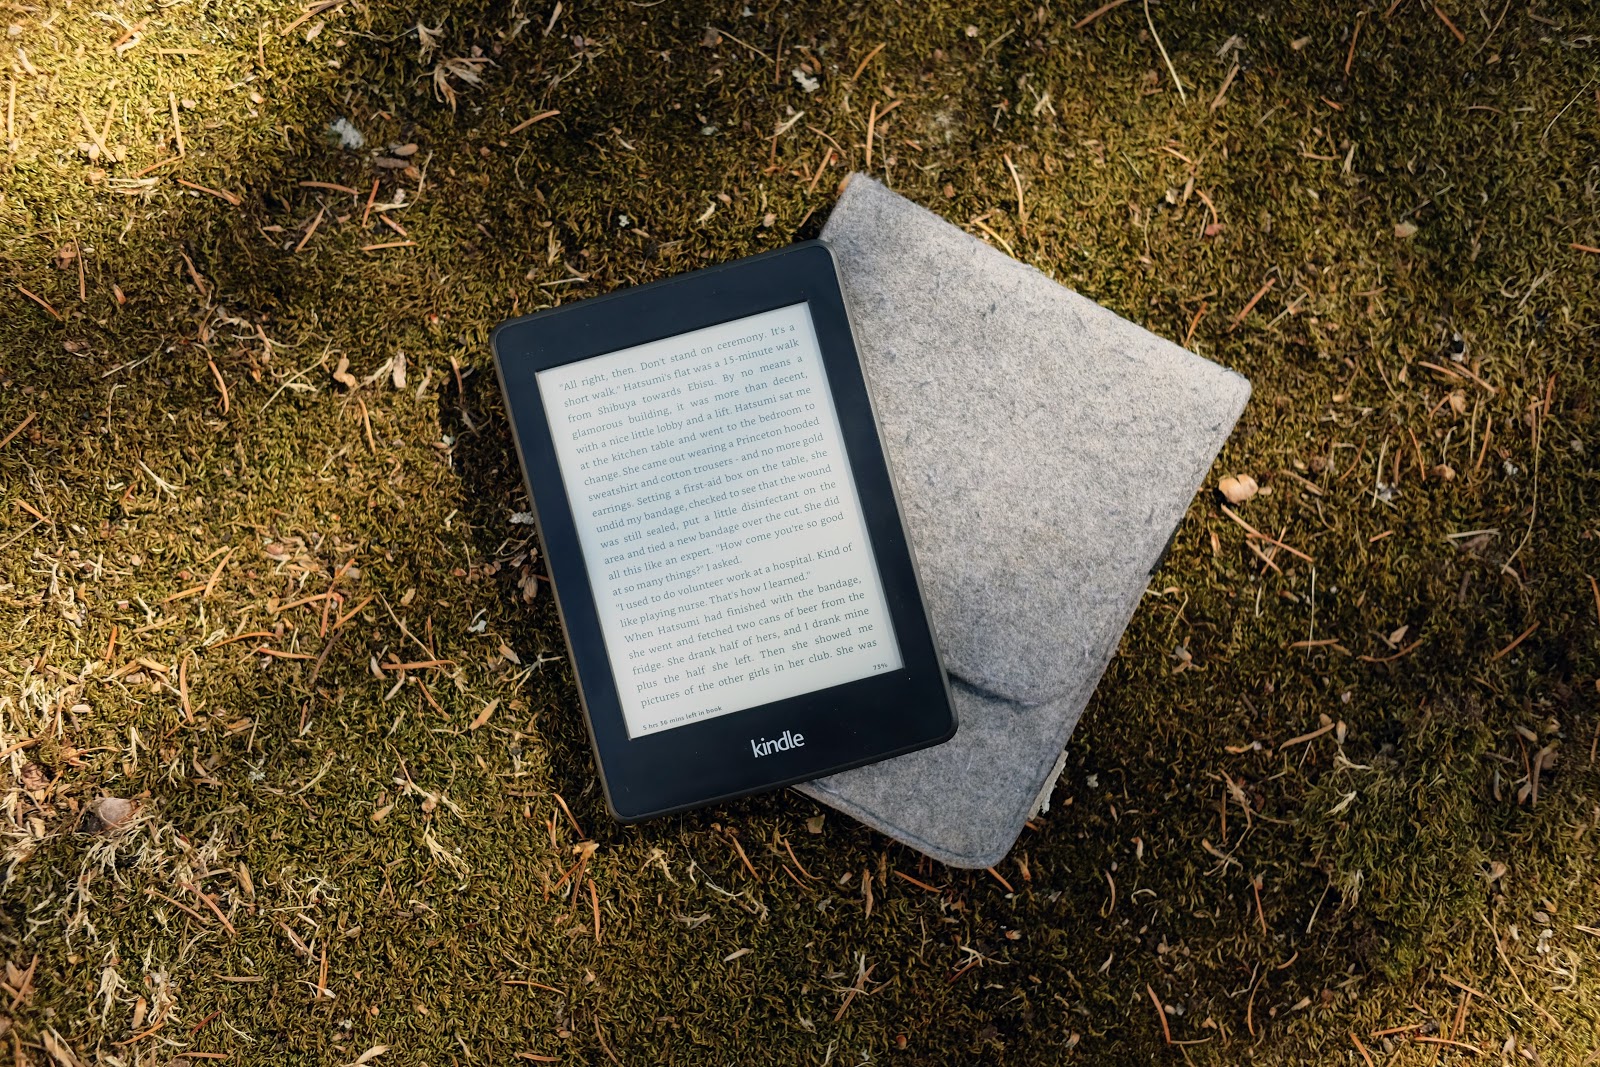 Kindle reading device and grey felt cover laying on the grass.